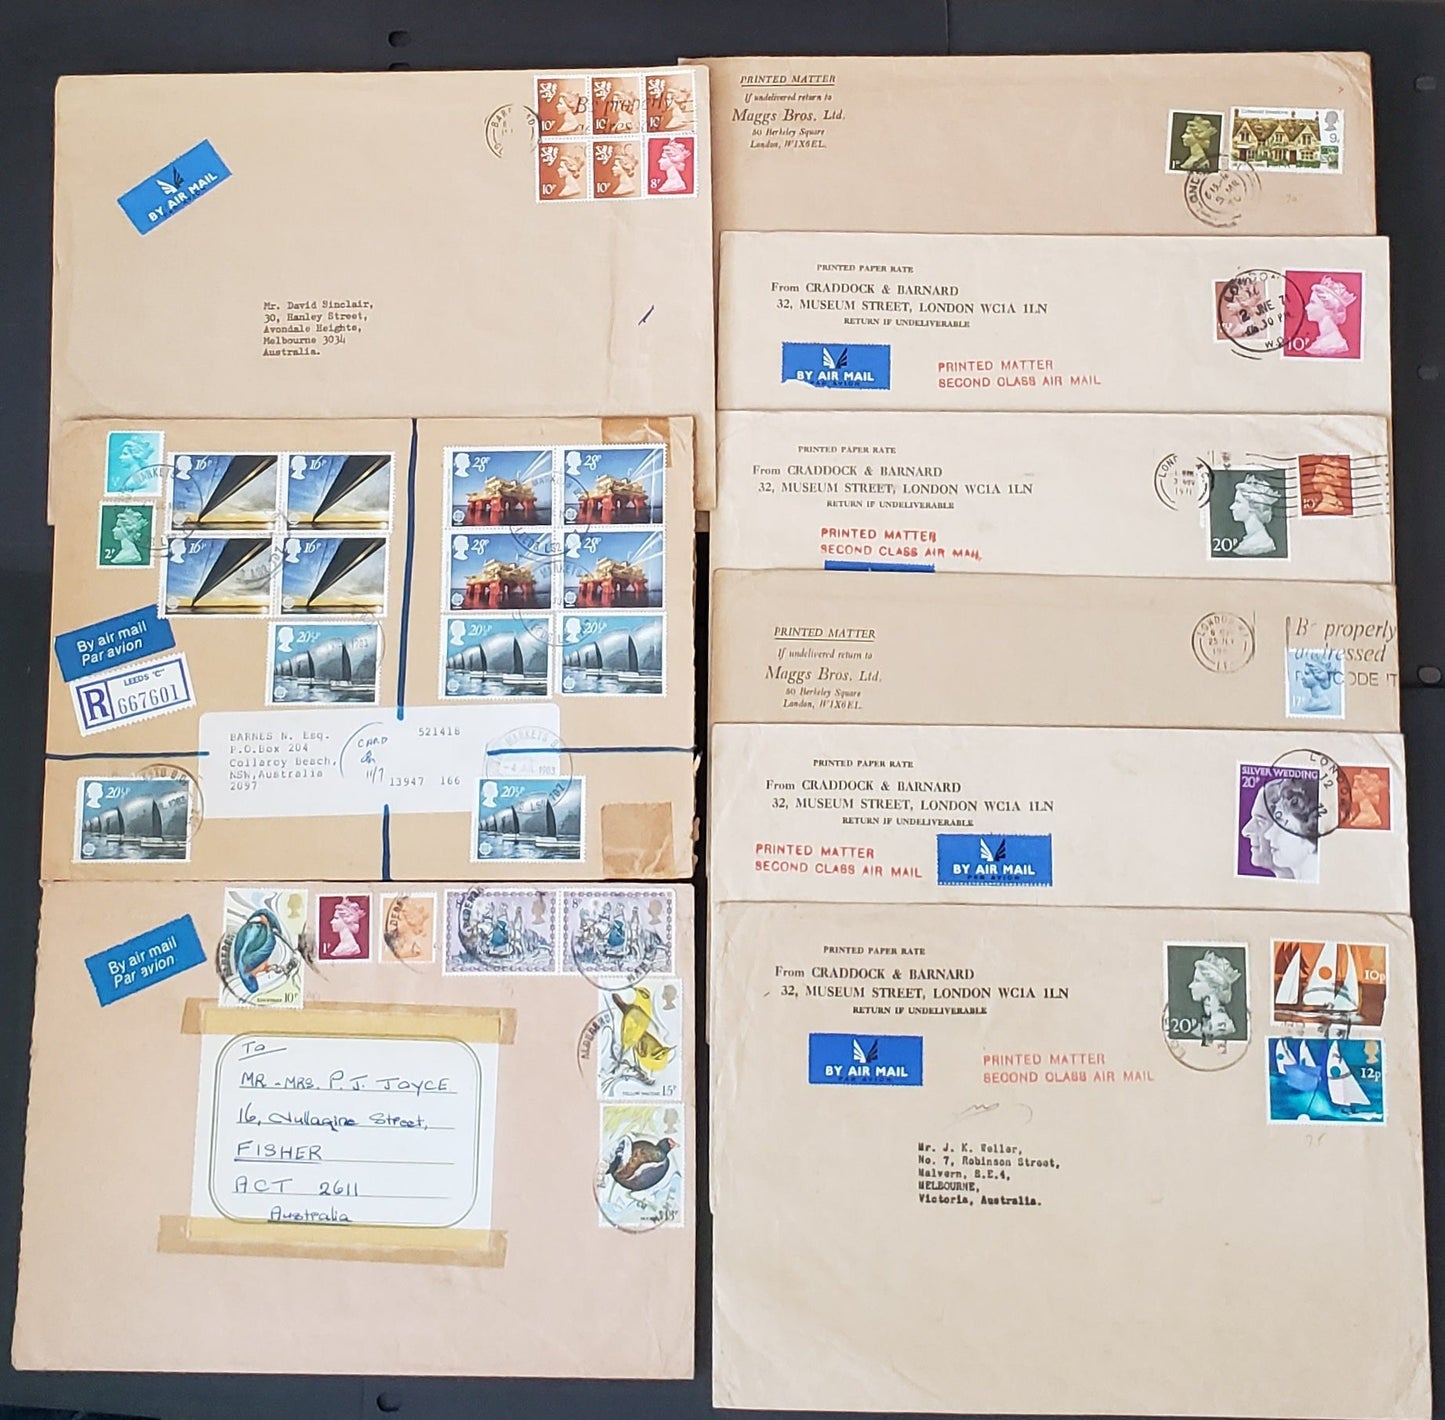 Lot 349 Great Britain 1970-1983 Decimal Machin Covers, A Selection of 9 Different Second Class Printed Matter Covers, With Values From 1d to 20p, All Sent to Australia, Net. Est. $10.